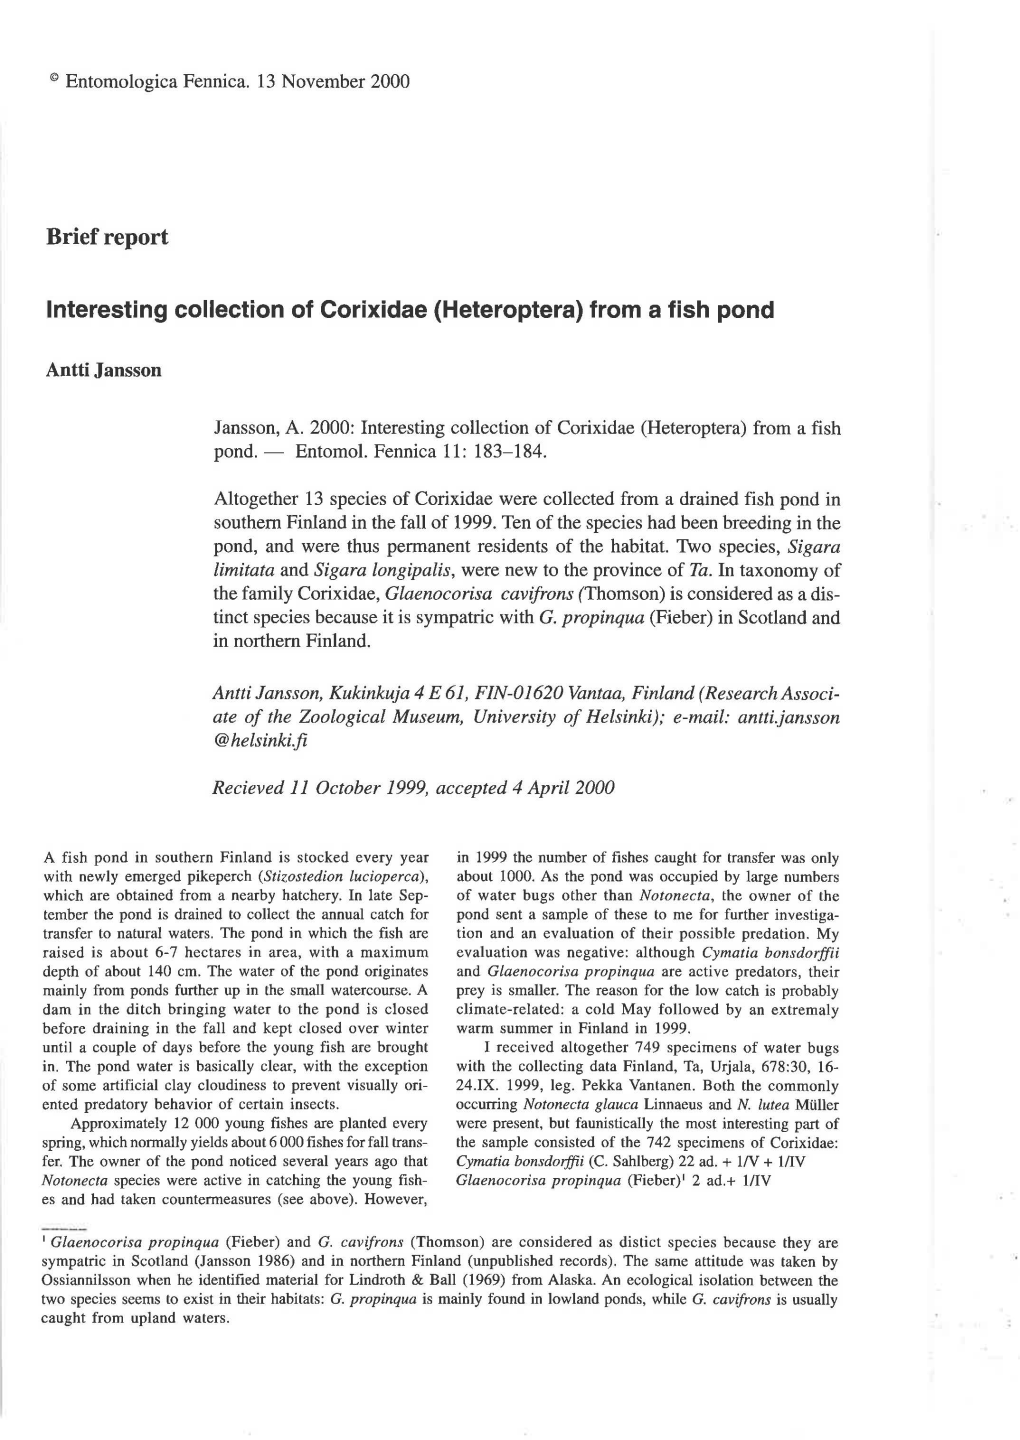 Brief Report Interesting Collection of Corixidae (Heteroptera) from a Fish